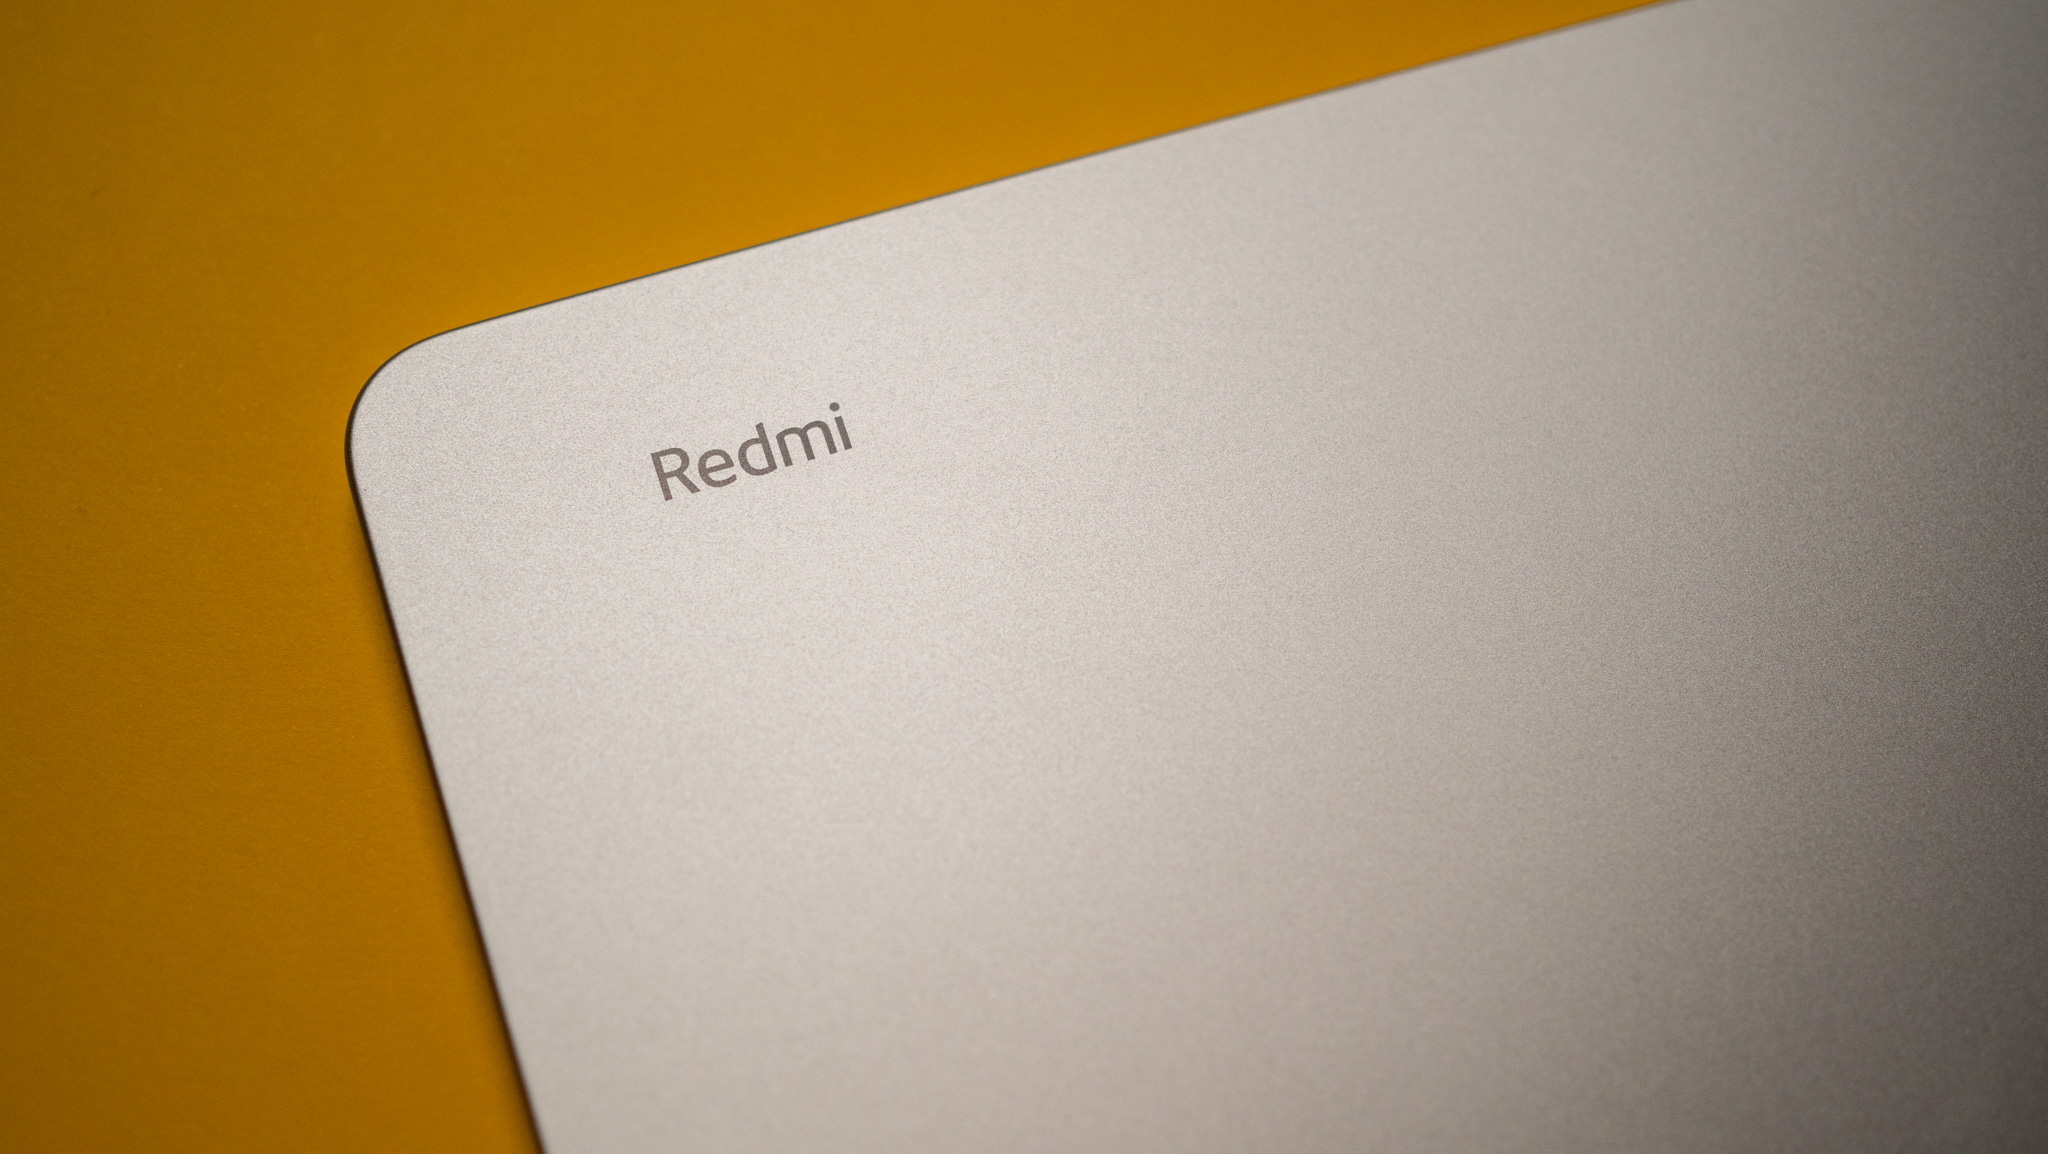 Redmi branding on the back of the Redmi Pad Pro